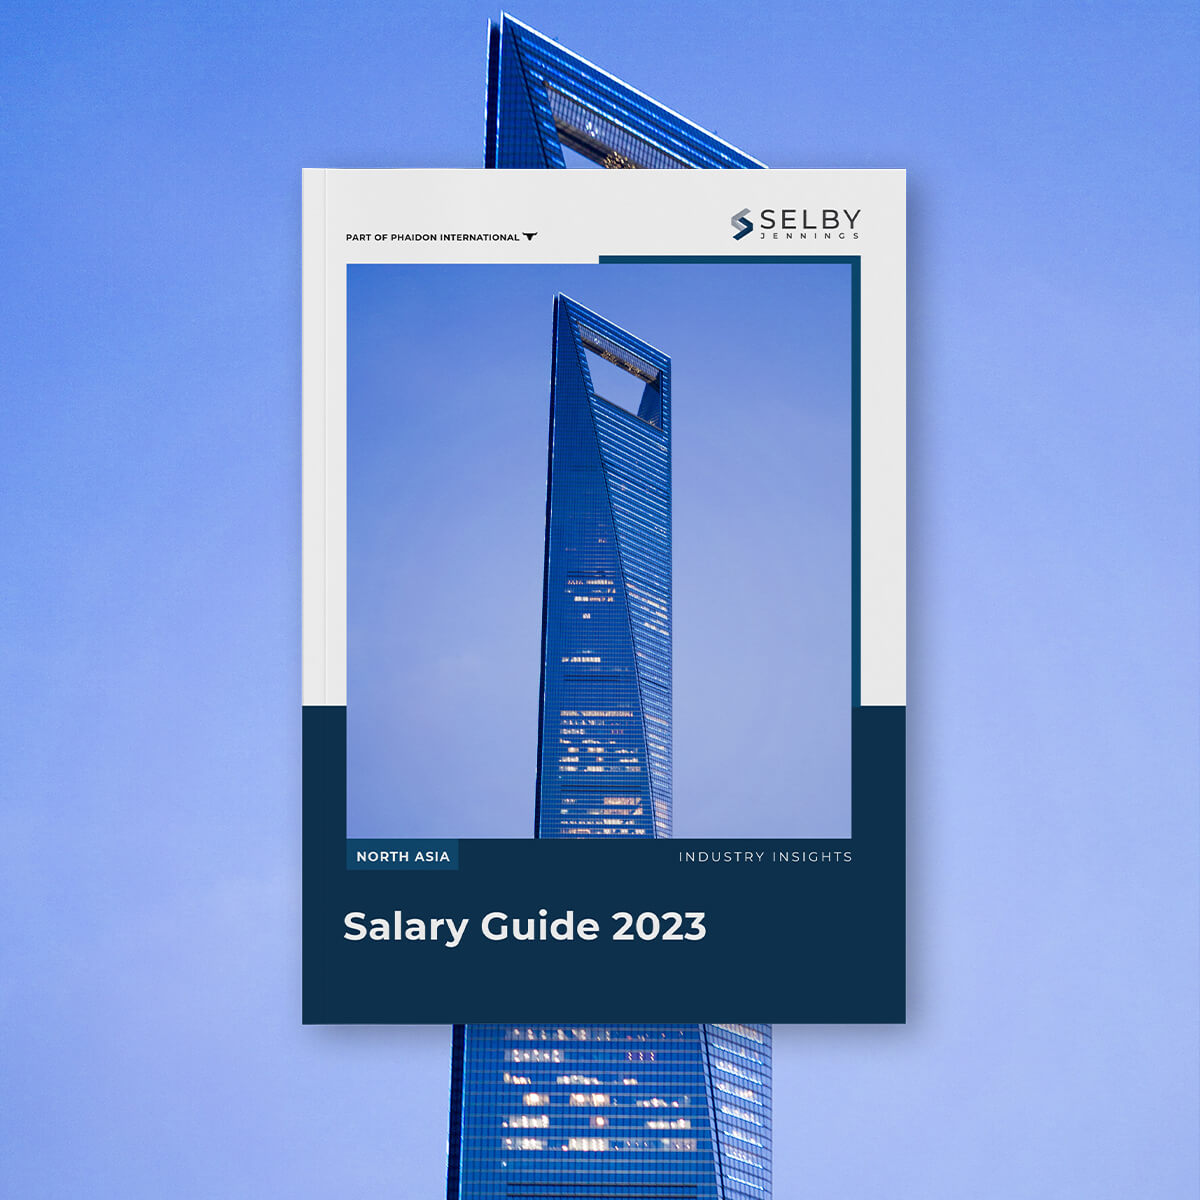 Salary Guide 2023 - North Asia Financial Services | Selby Jennings